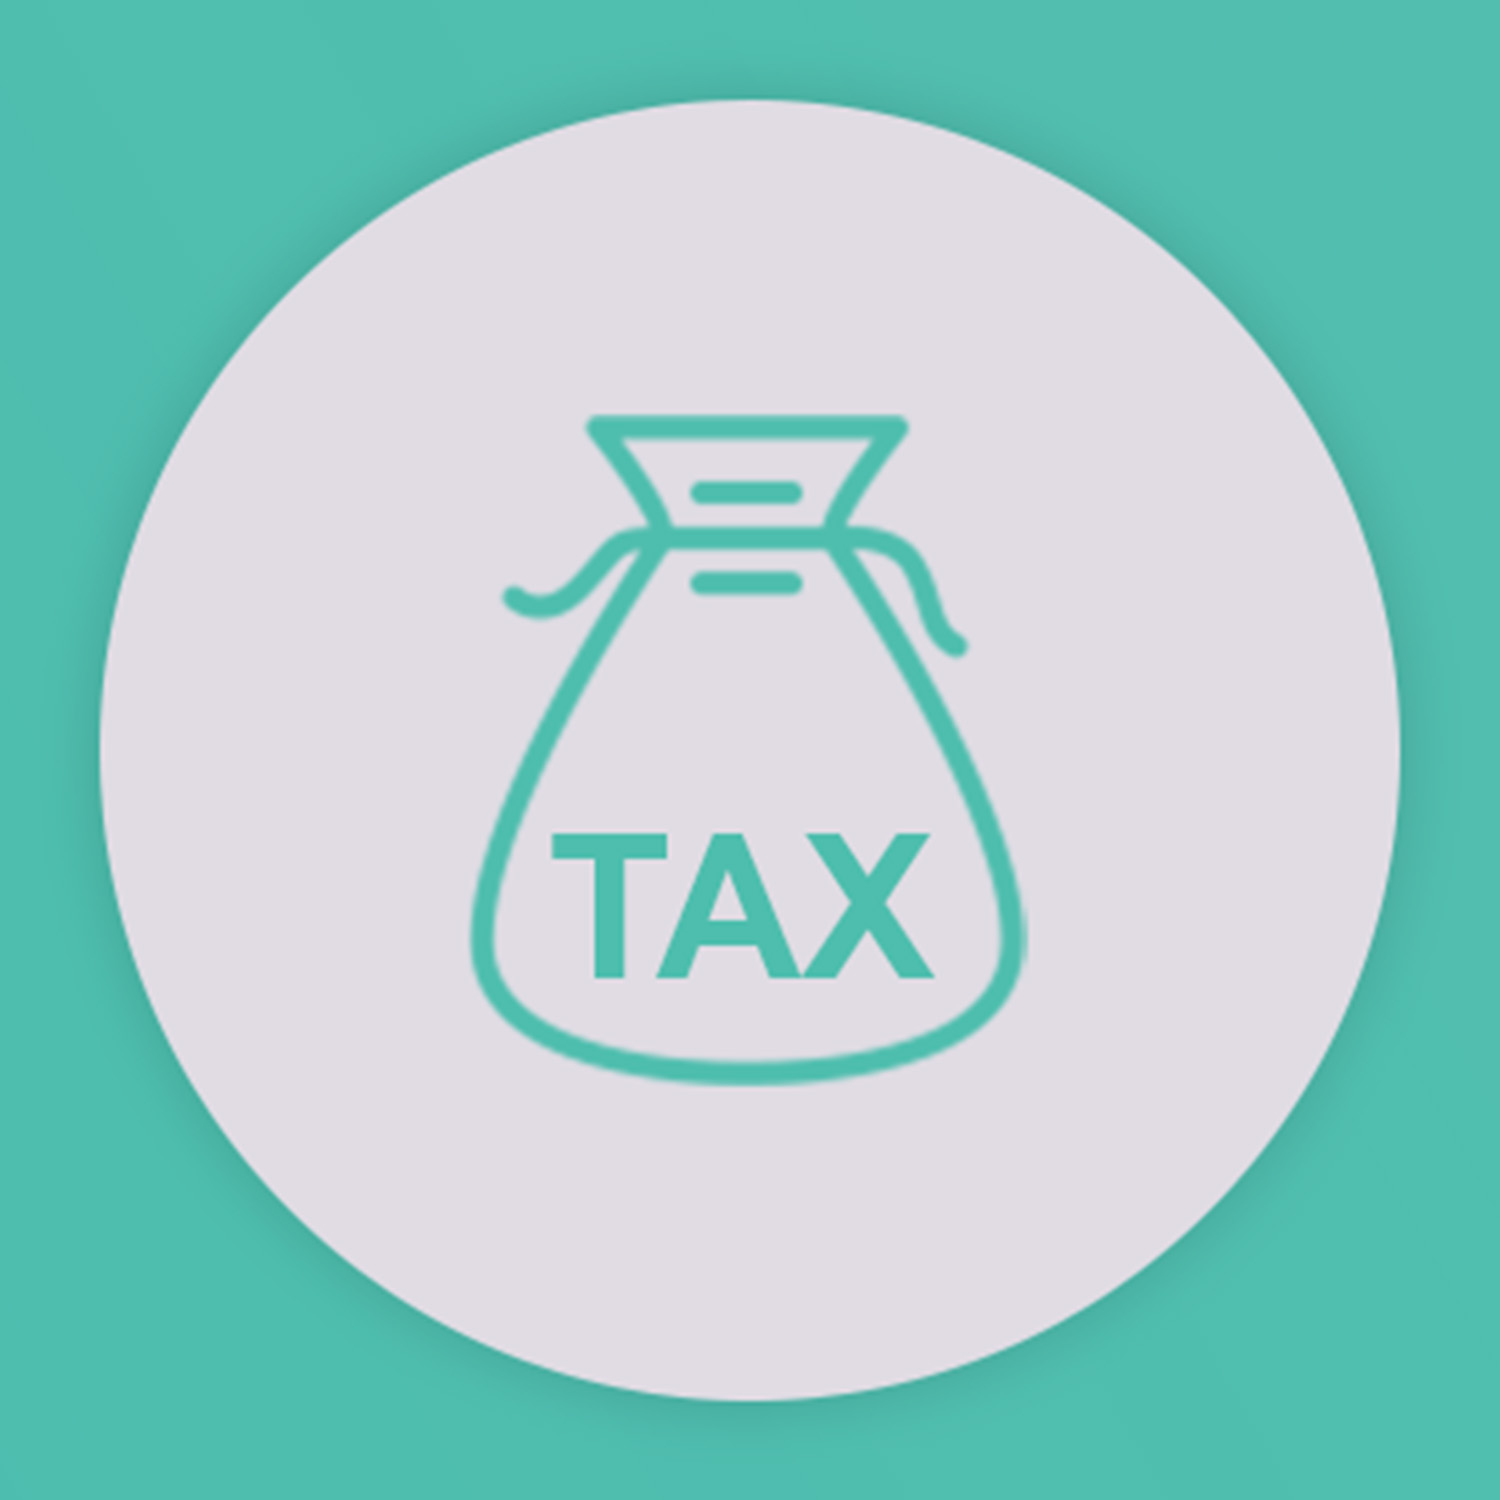 [VAT] Value Added Tax in Indonesia